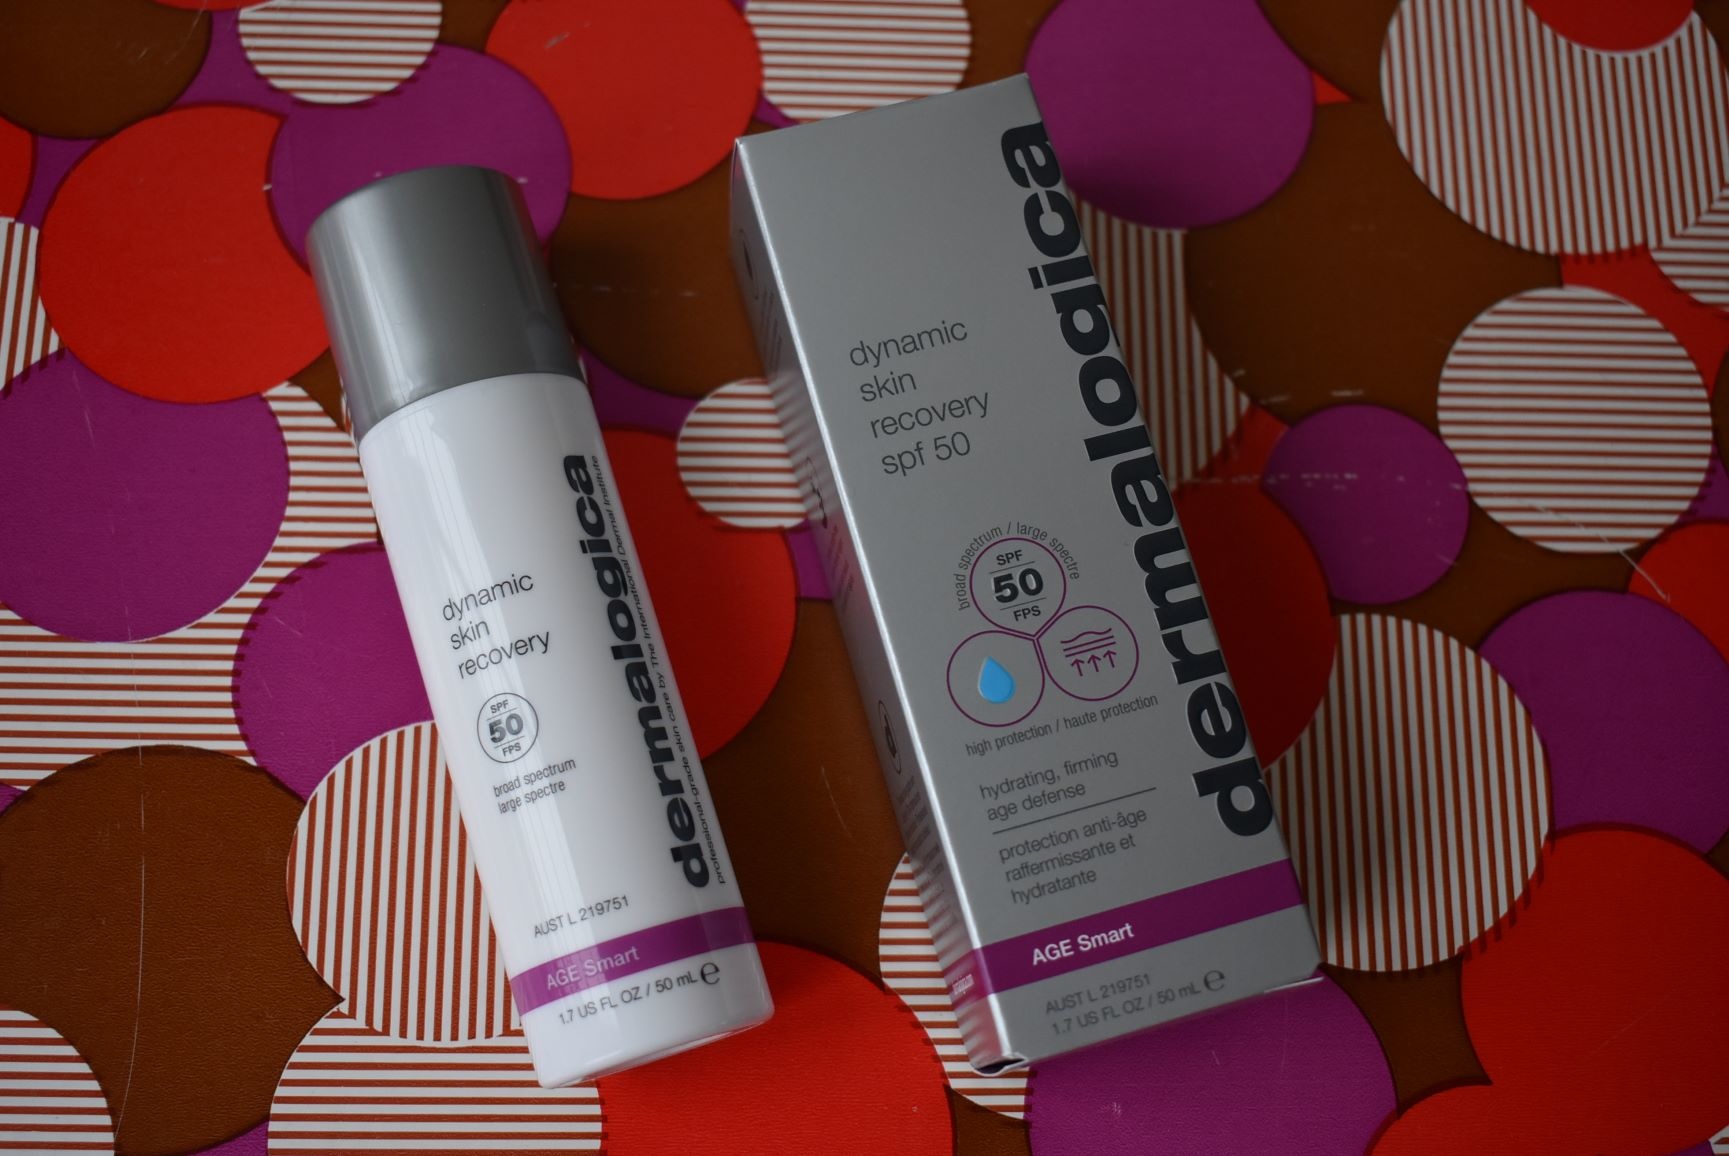 Review: Dermalogica Age Smart Dynamic Skin Recovery spf50